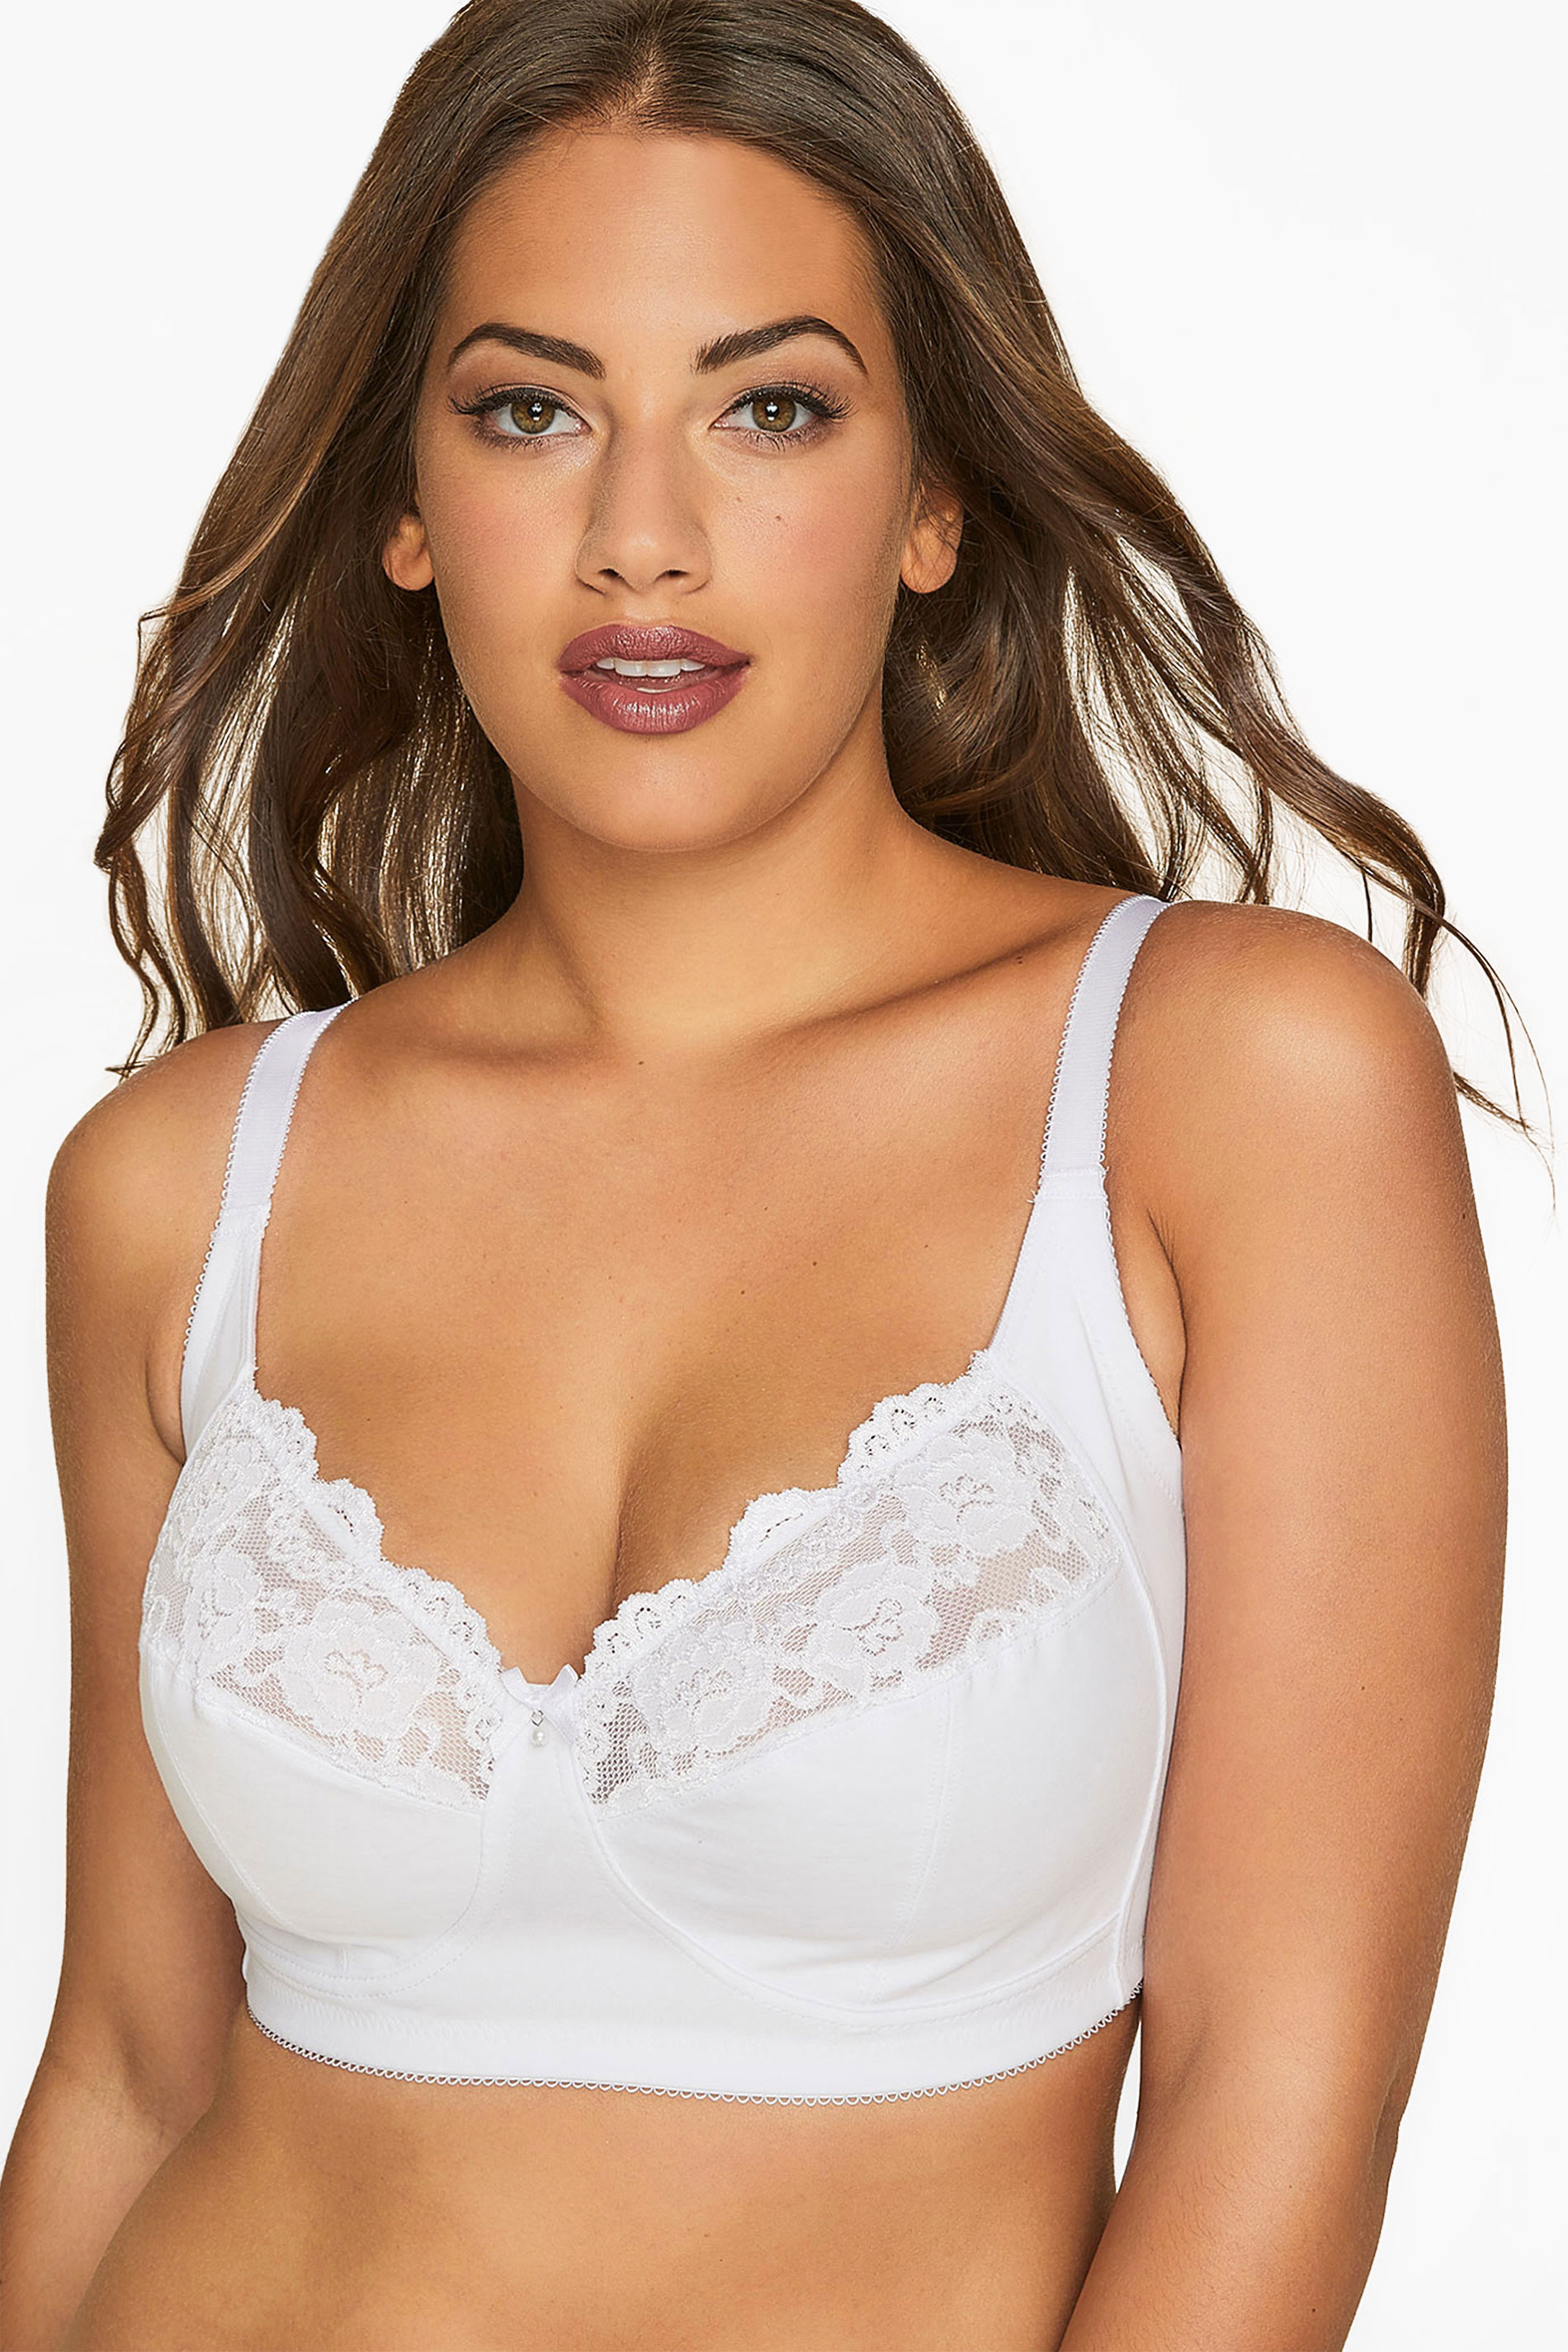 White Non-Wired Cotton Bra With Lace Trim - Best Seller_A.jpg